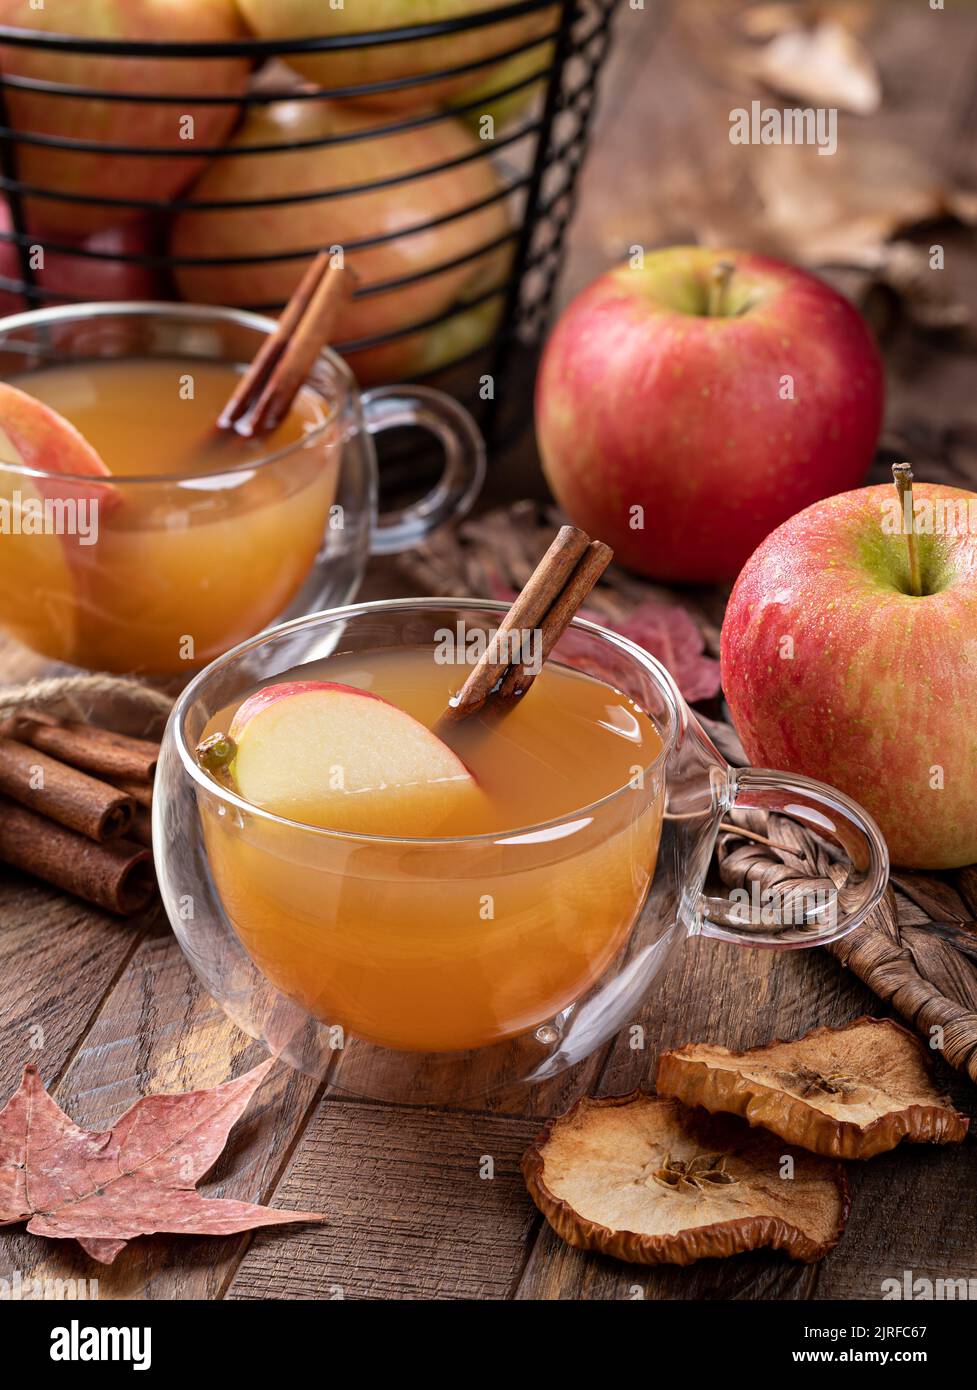 Cup of apple cider with cinnamon stick and sliced apple on a wooden table with fresh apples in background Stock Photo